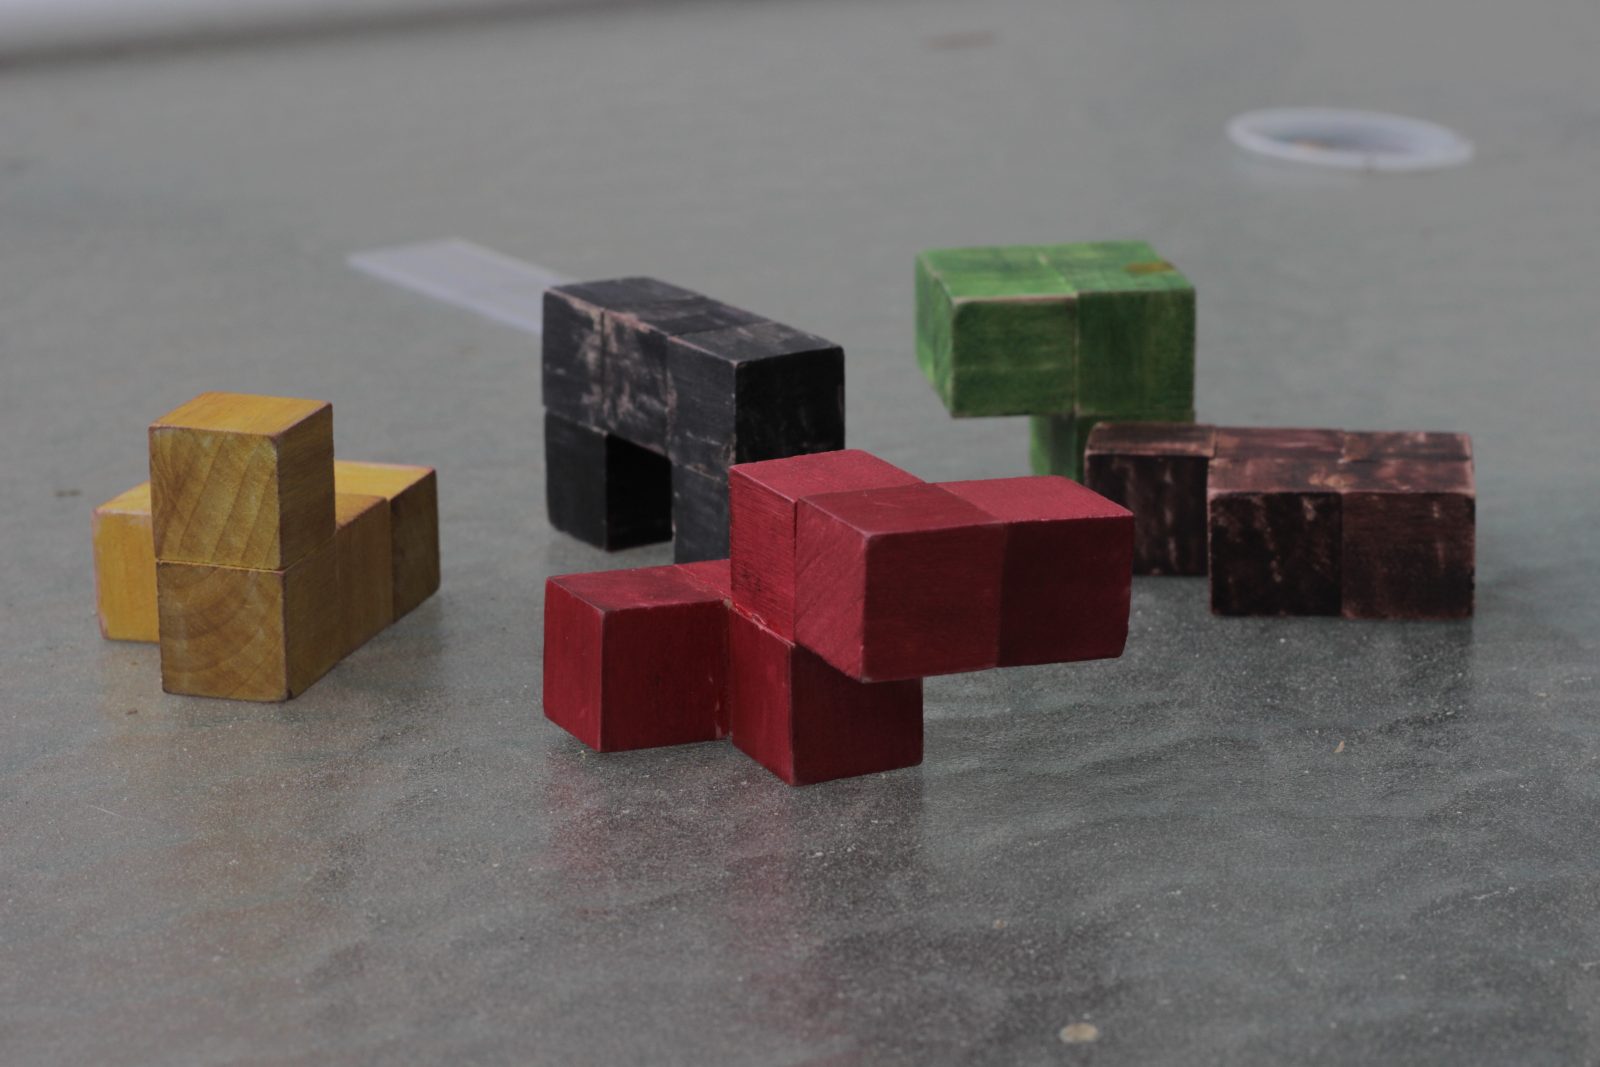 A photo of a dismantled puzzle cube